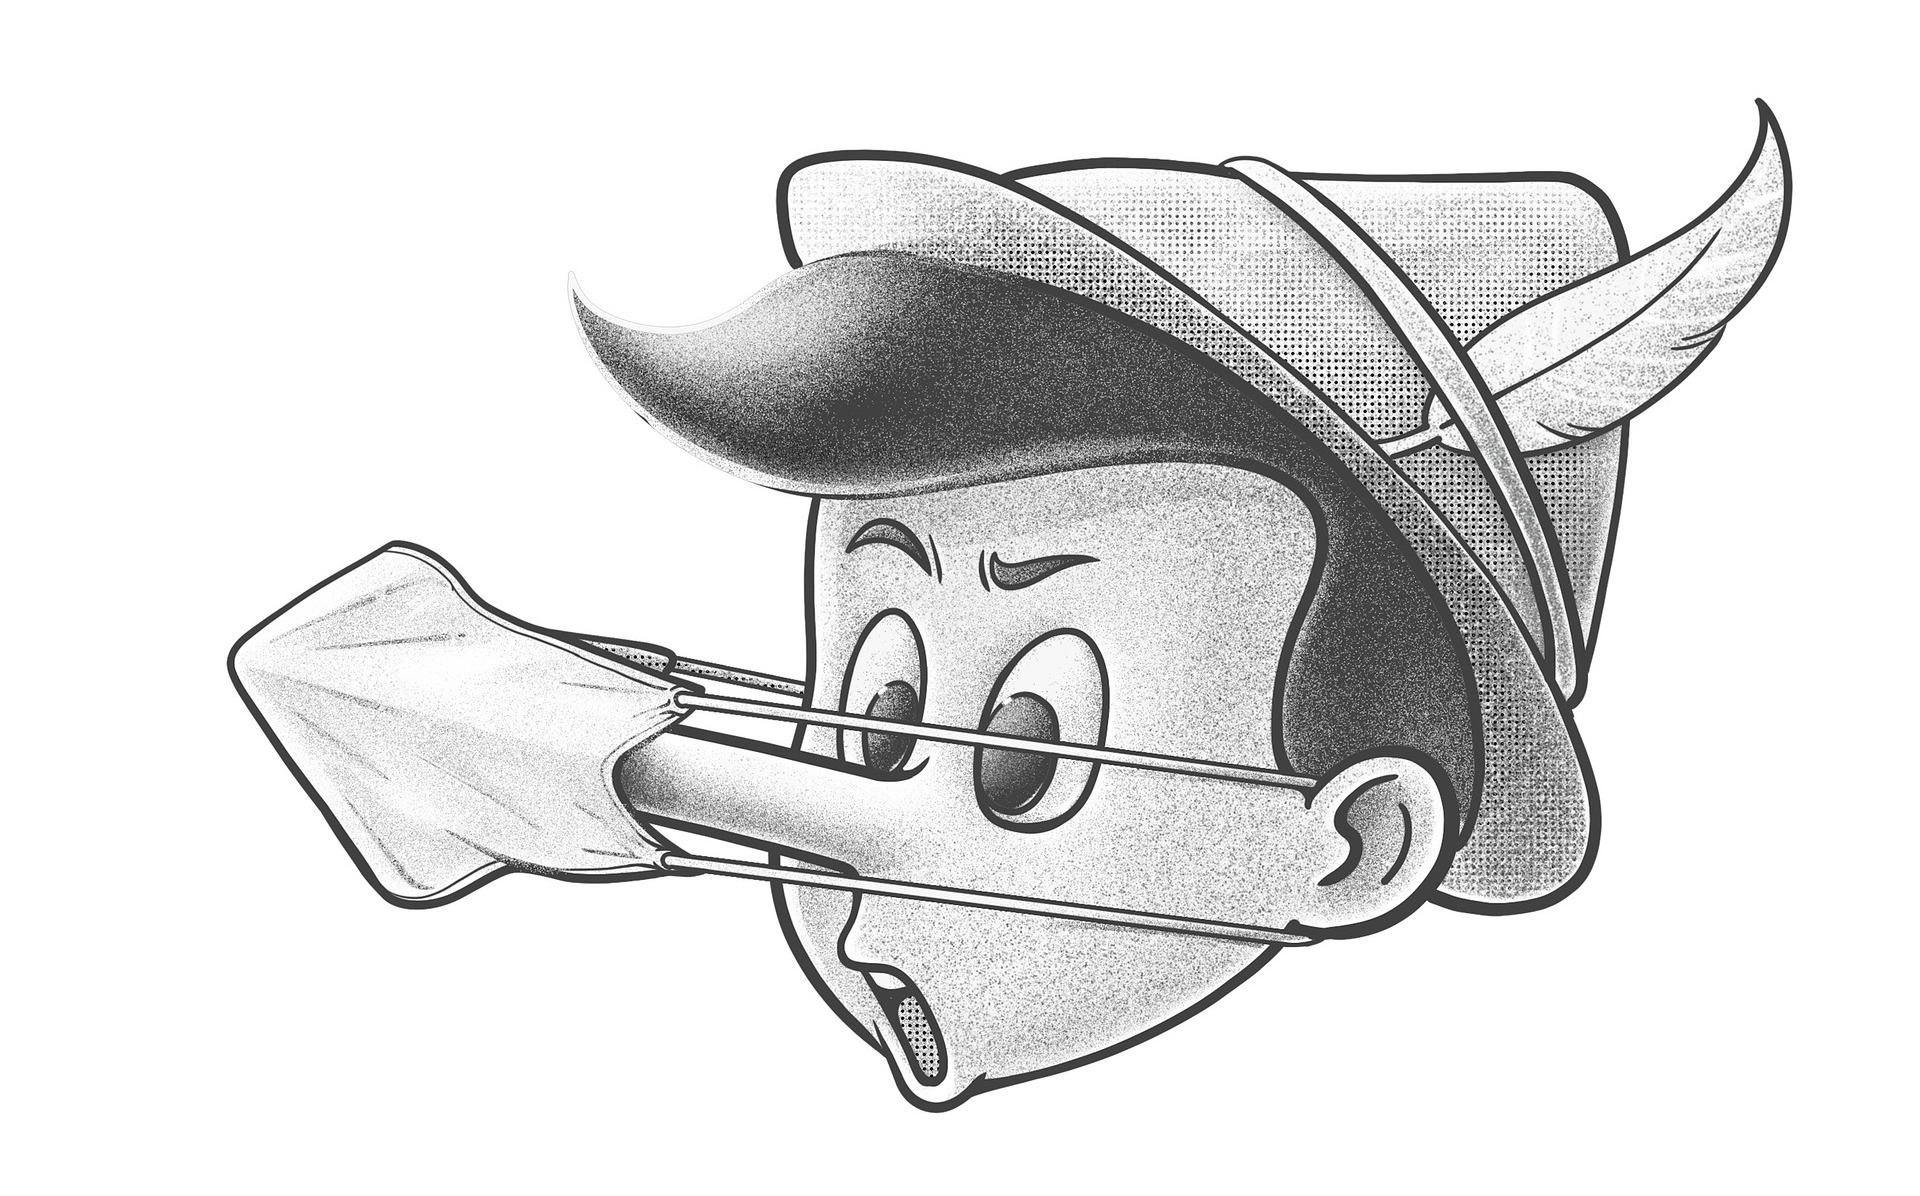 An image of a Pinocchio